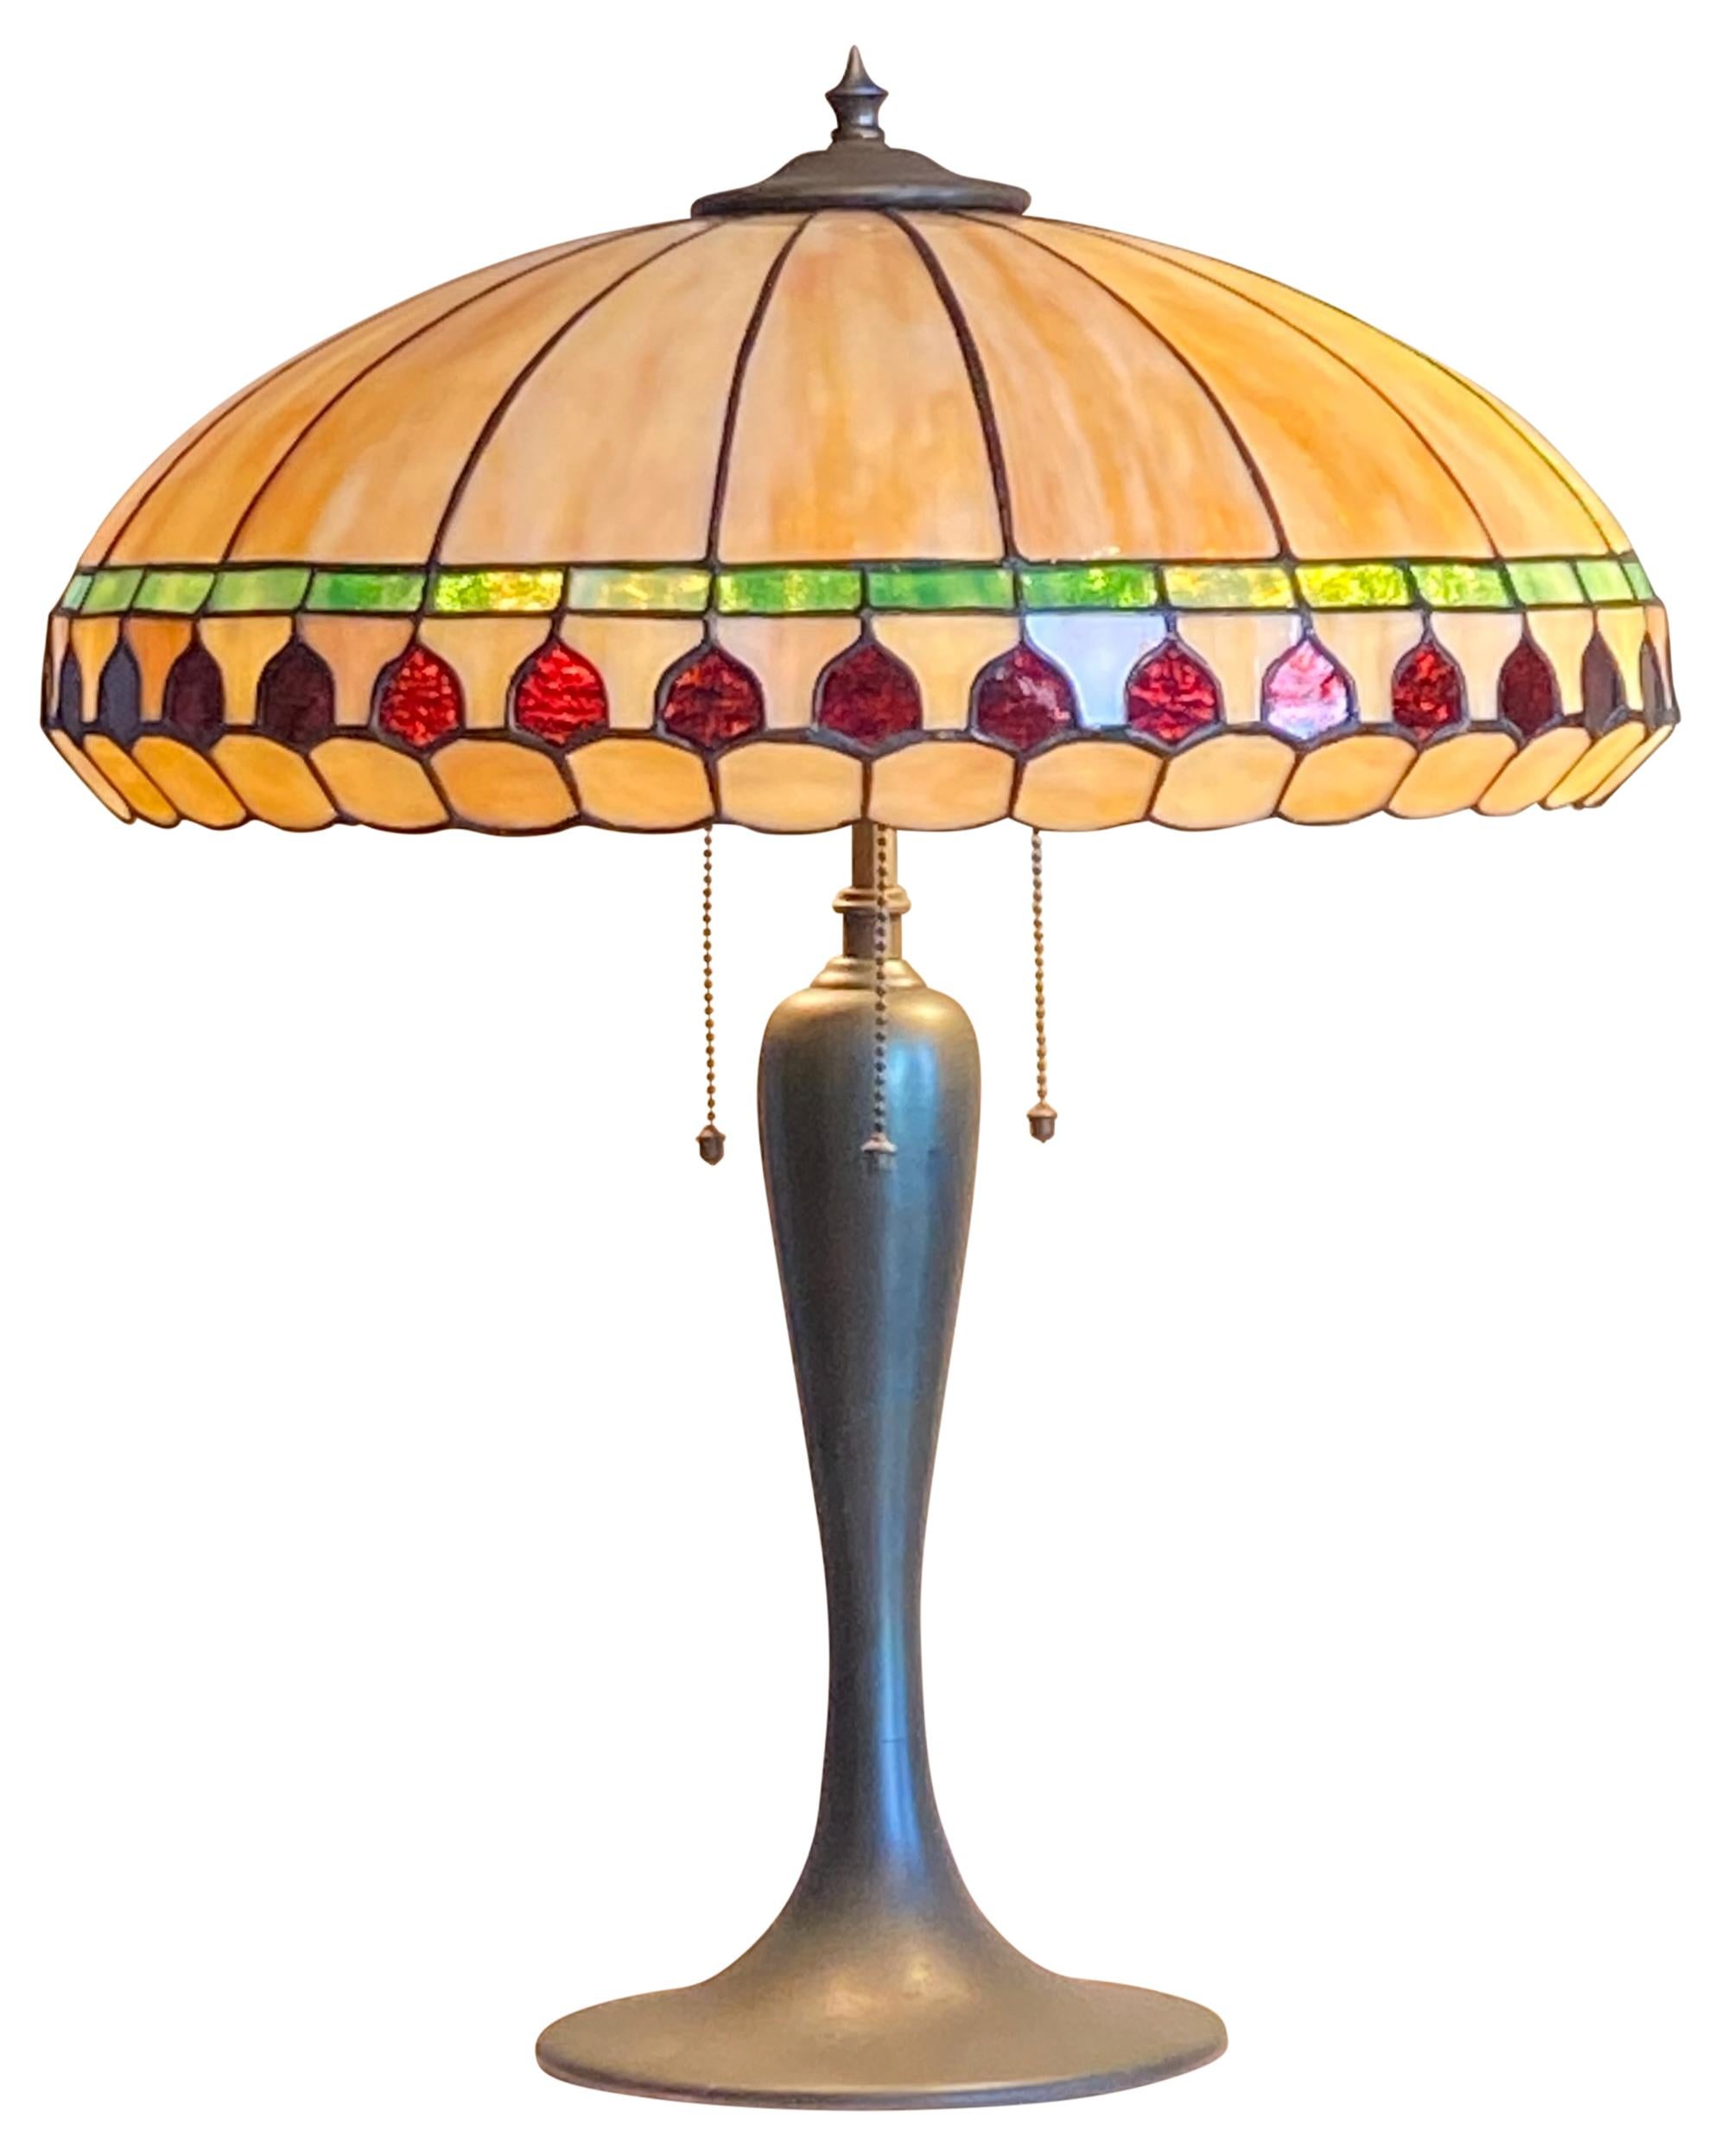 Antique Arts and Crafts period leaded glass table lamp.
Totally original and excellent quality example of this period lamp. 
3 sockets. 
In excellent condition, no cracks or damage. 
Recently re-wired and ready to use.
American, early 20th century.